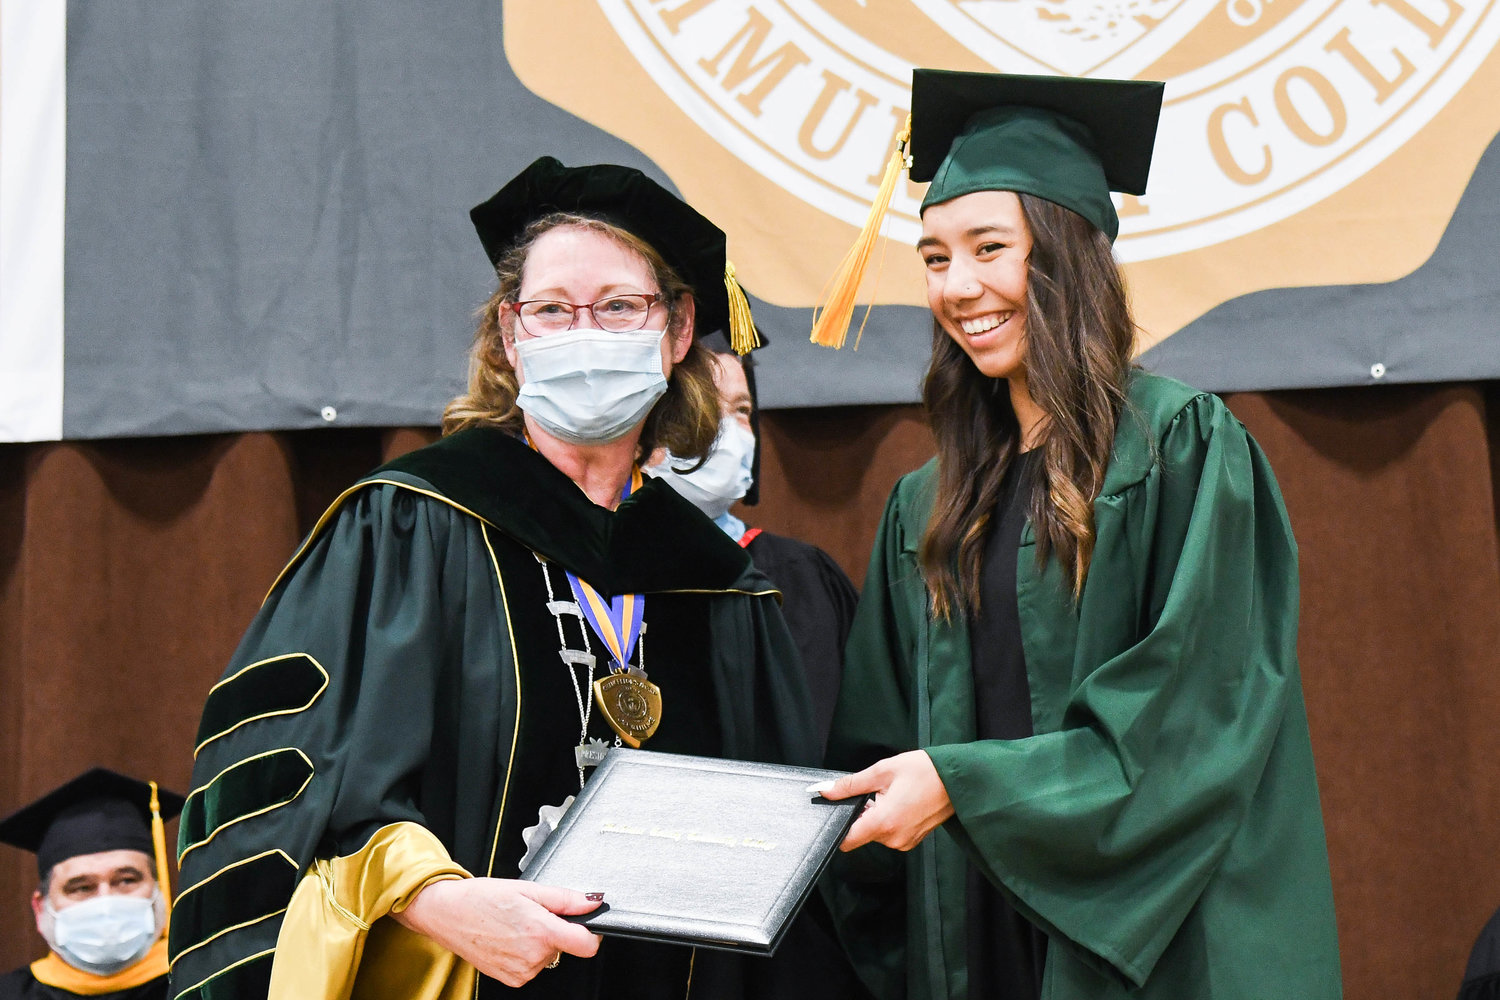 Makenna Hill receives her certificate of graduation as Herkimer County Community College conducted its 54th commencement ceremony on Friday.